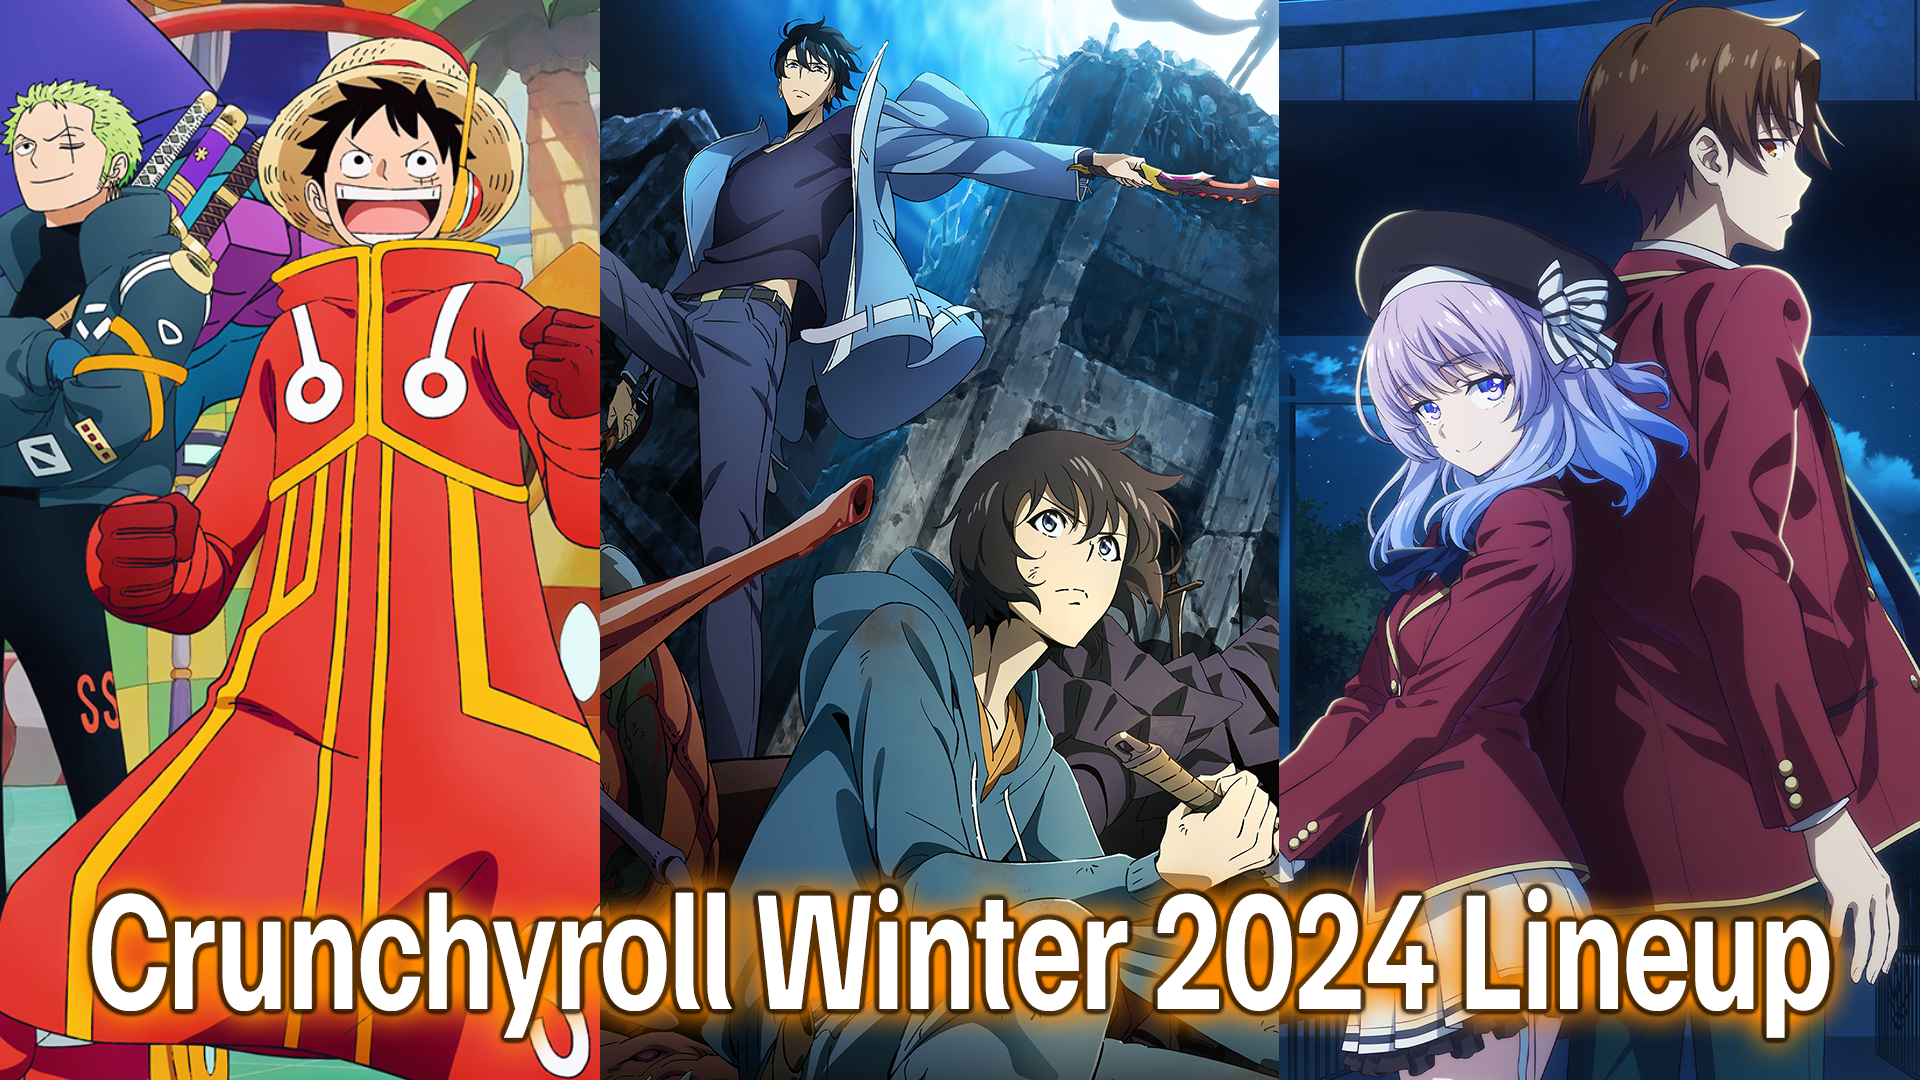 Crunchyroll Winter 2024 Dubs Include Solo Leveling, Classroom of